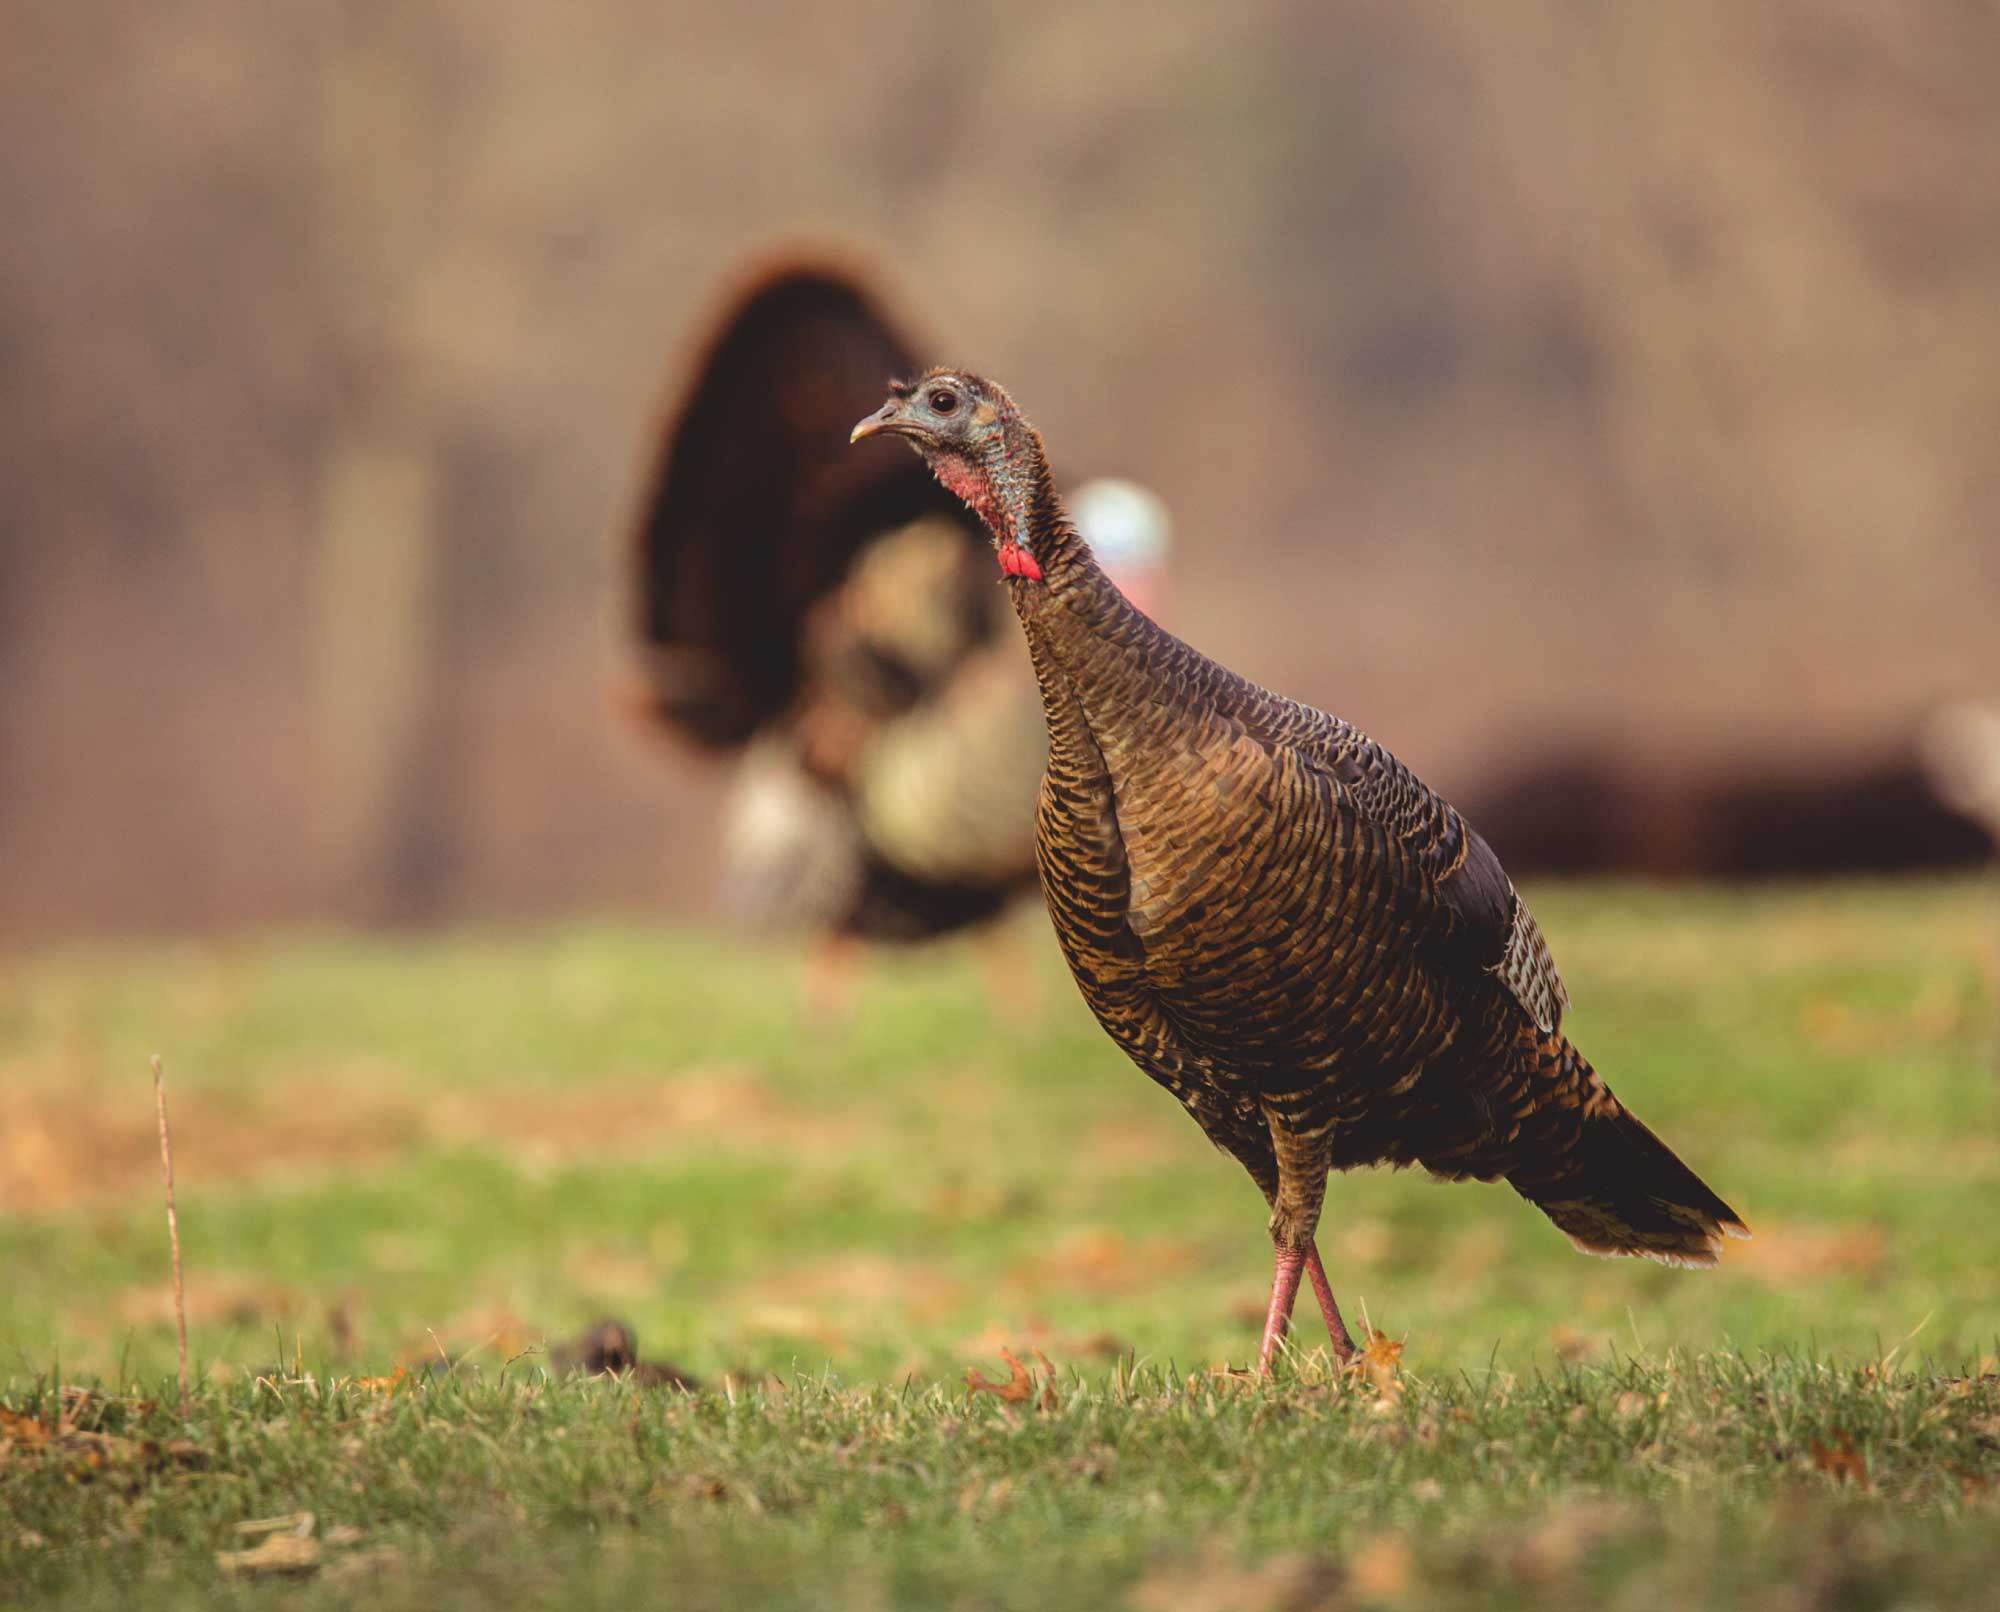 How to Call Fighting Hens While Wild Turkey Hunting